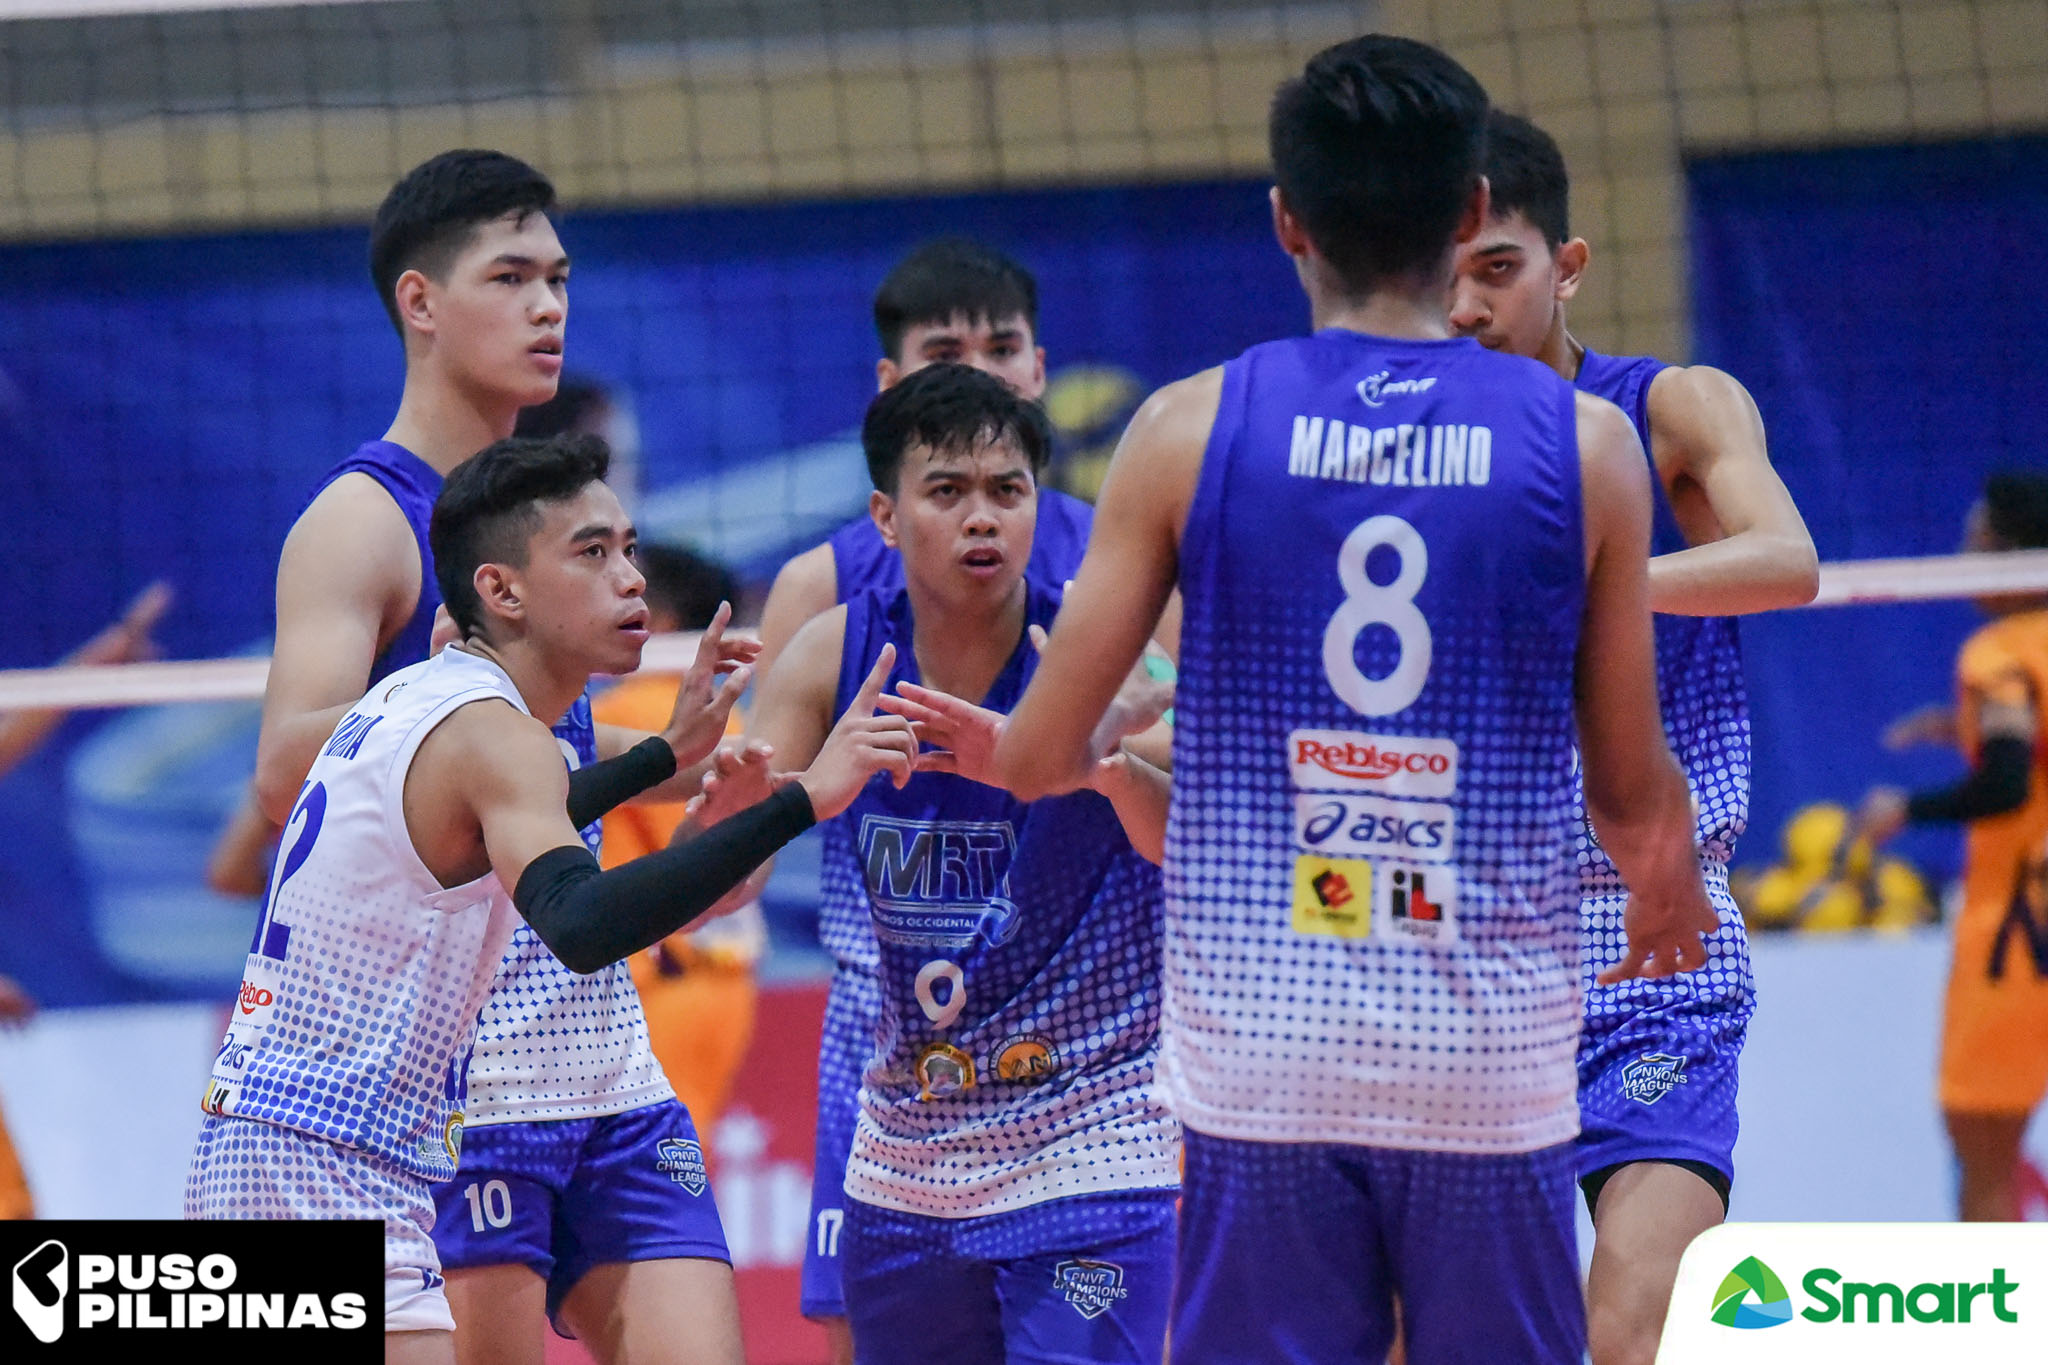 PNVF-Negros-vs.-Sabong-Pudadera-4964 For Mike Beronio: MRT Negros salvages fifth in PNVFCL News Volleyball  - philippine sports news